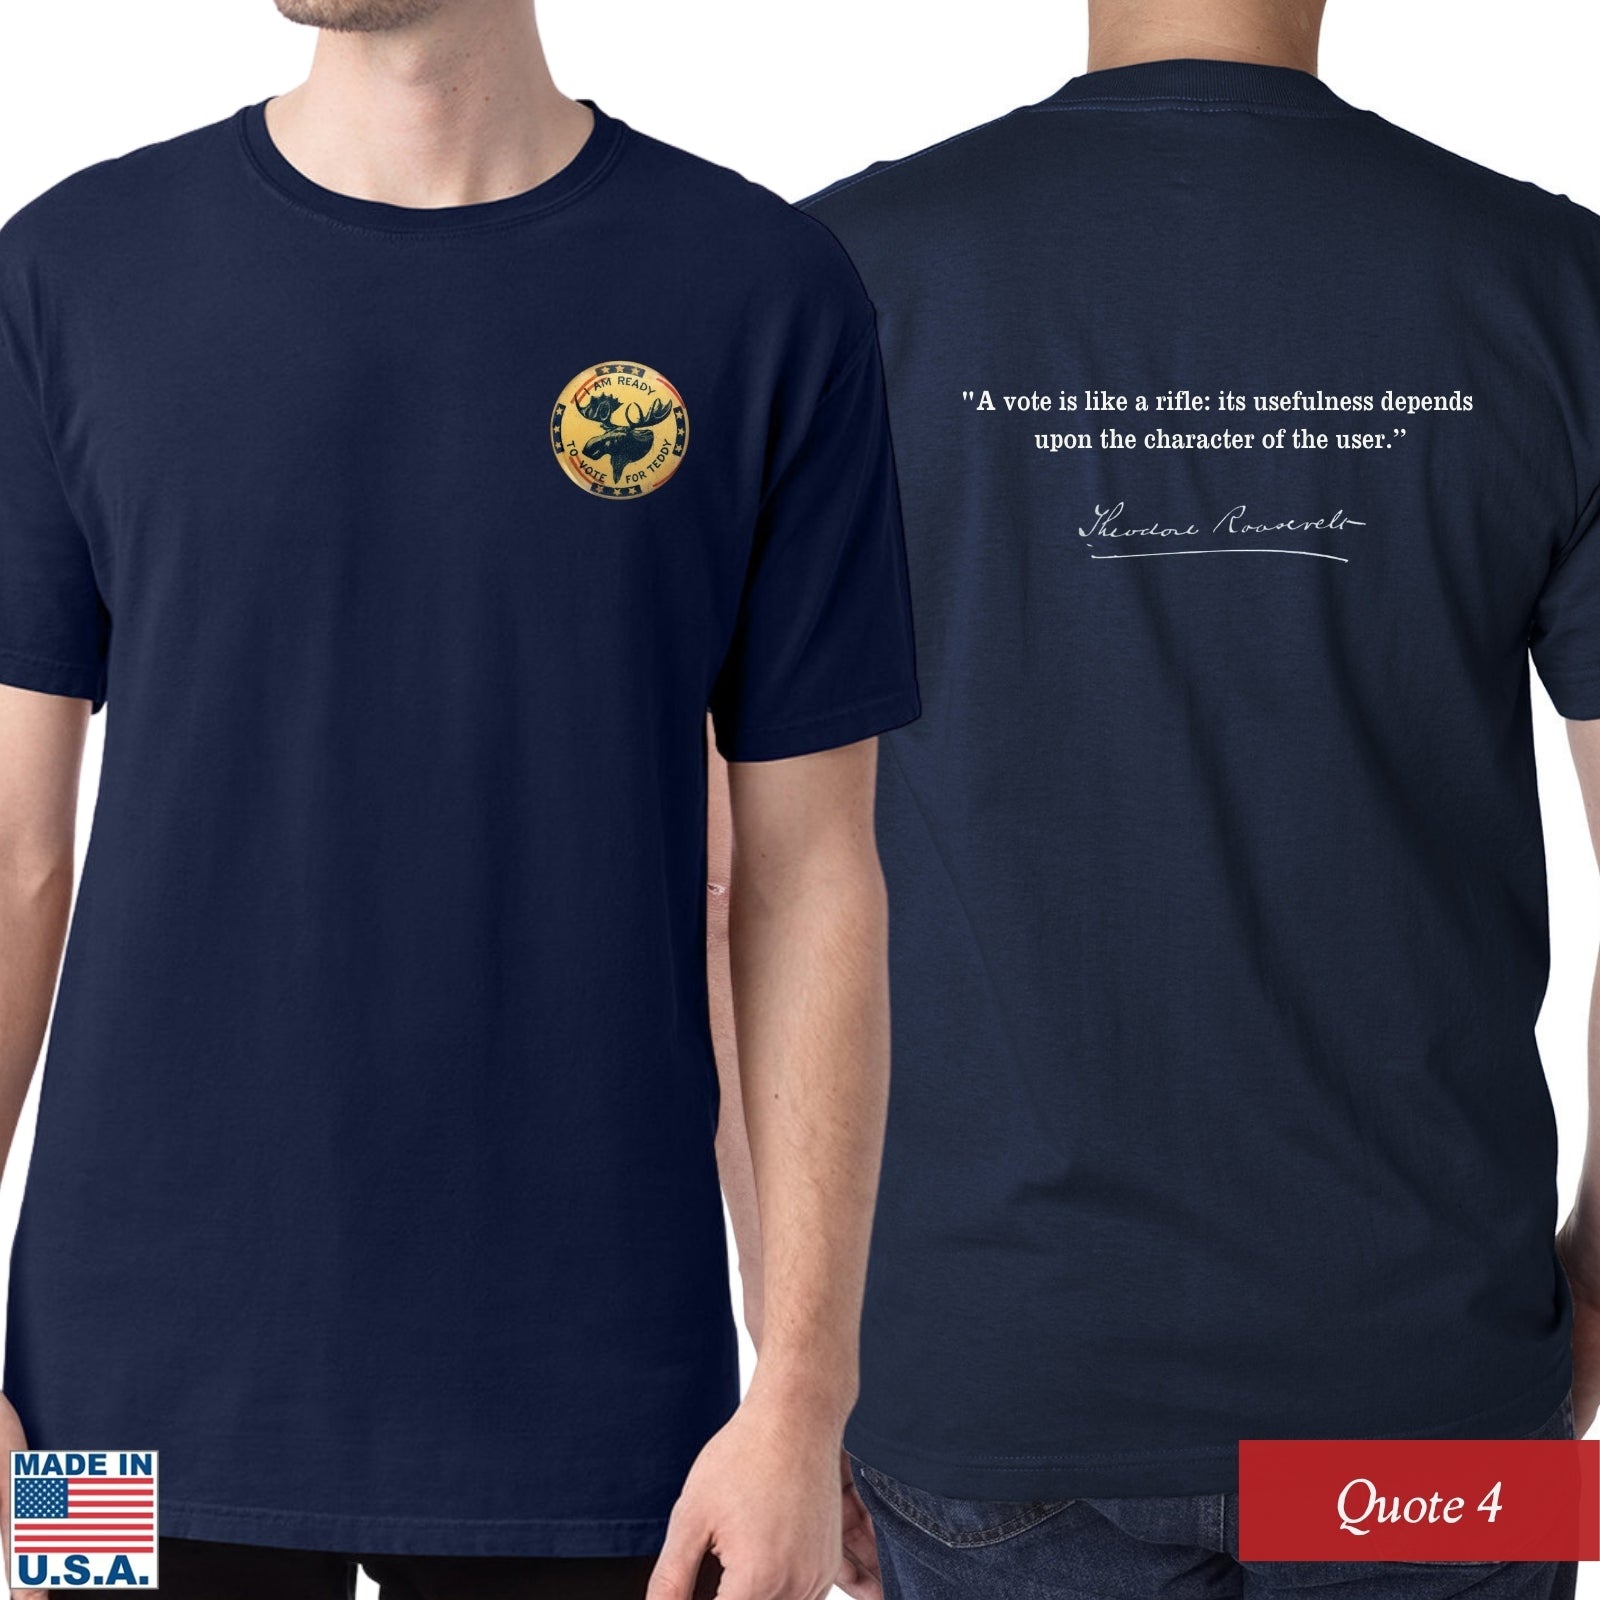 Quote 4 of the Teddy Roosevelt “I’m ready to vote for Teddy” presidential campaign shirt — Made in America from The History List store